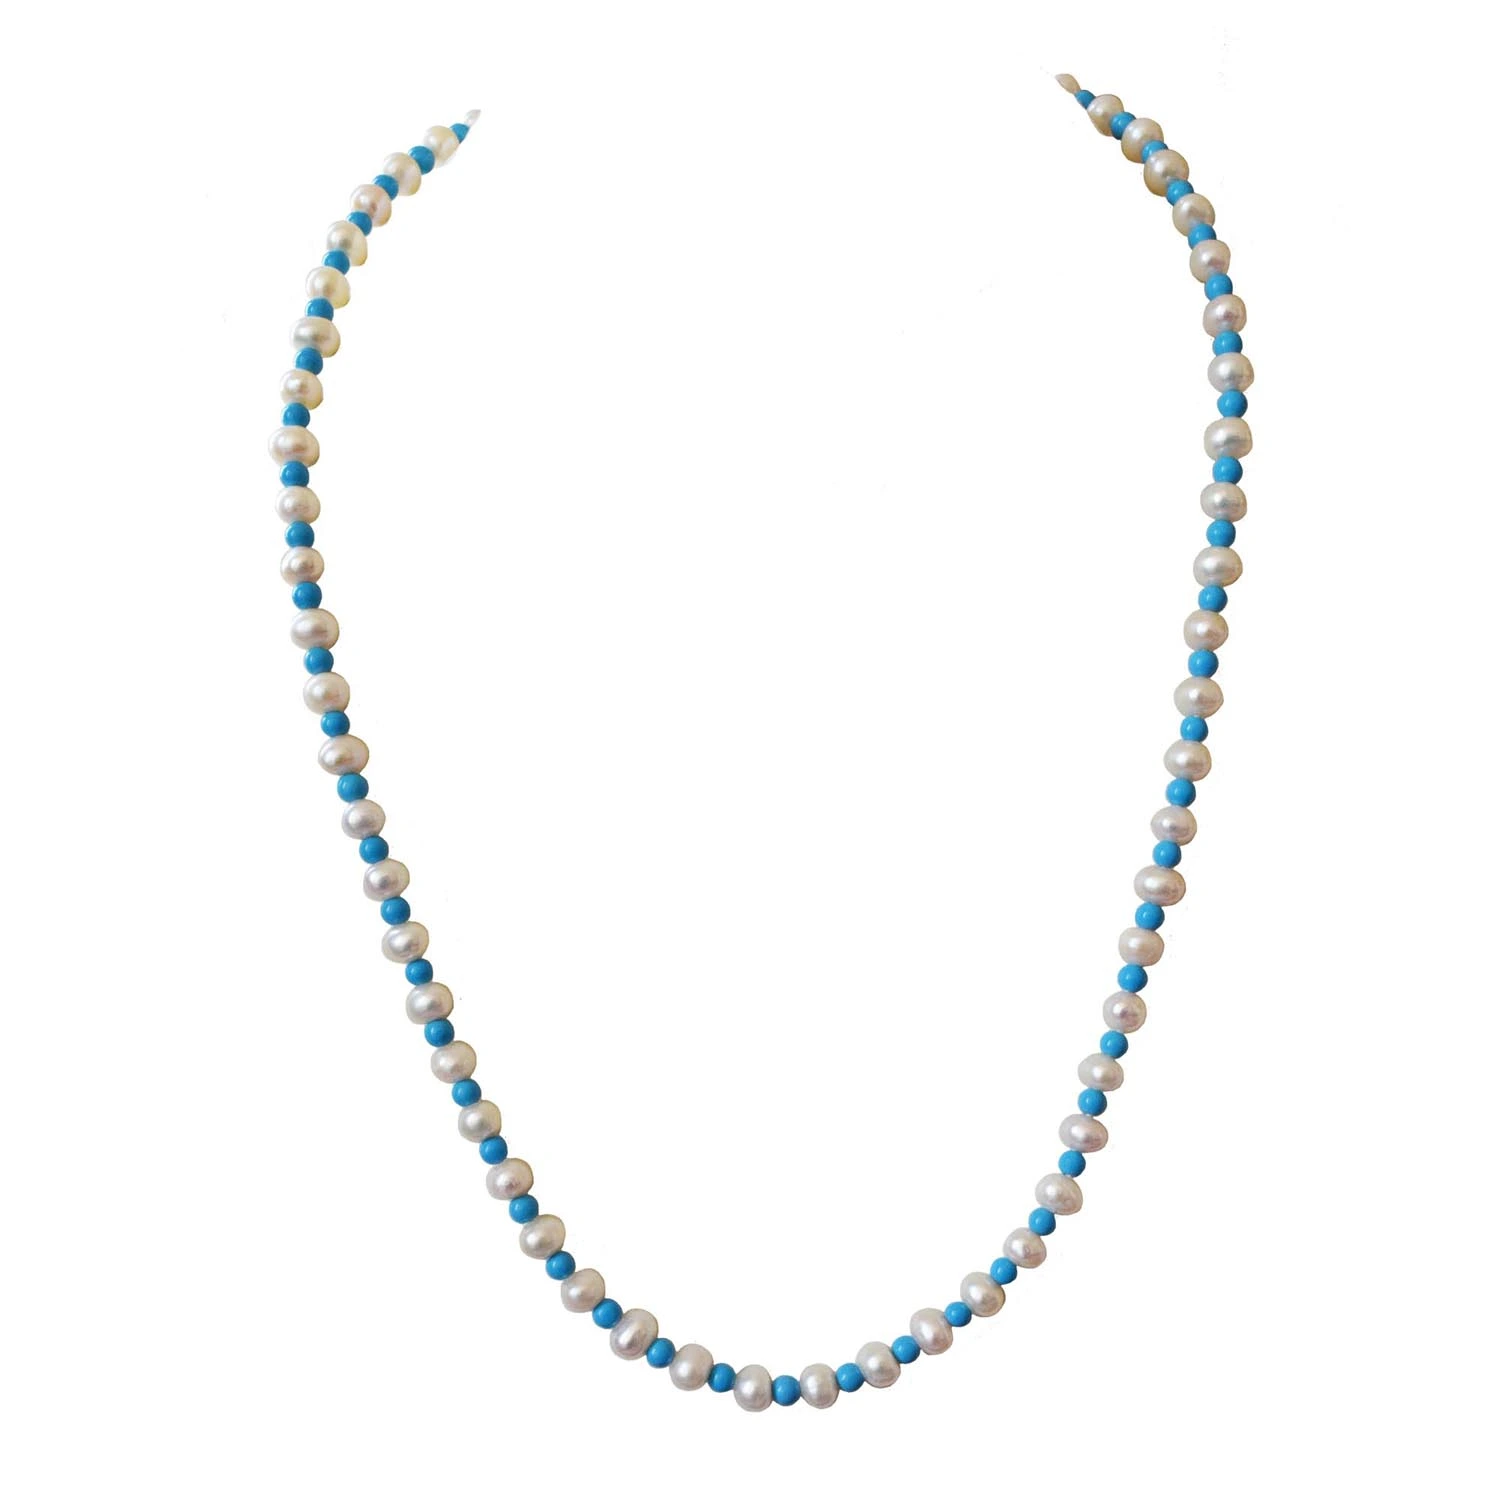 Aqua Elegance: Turquoise and Pearl Bead Necklace (SN1036)